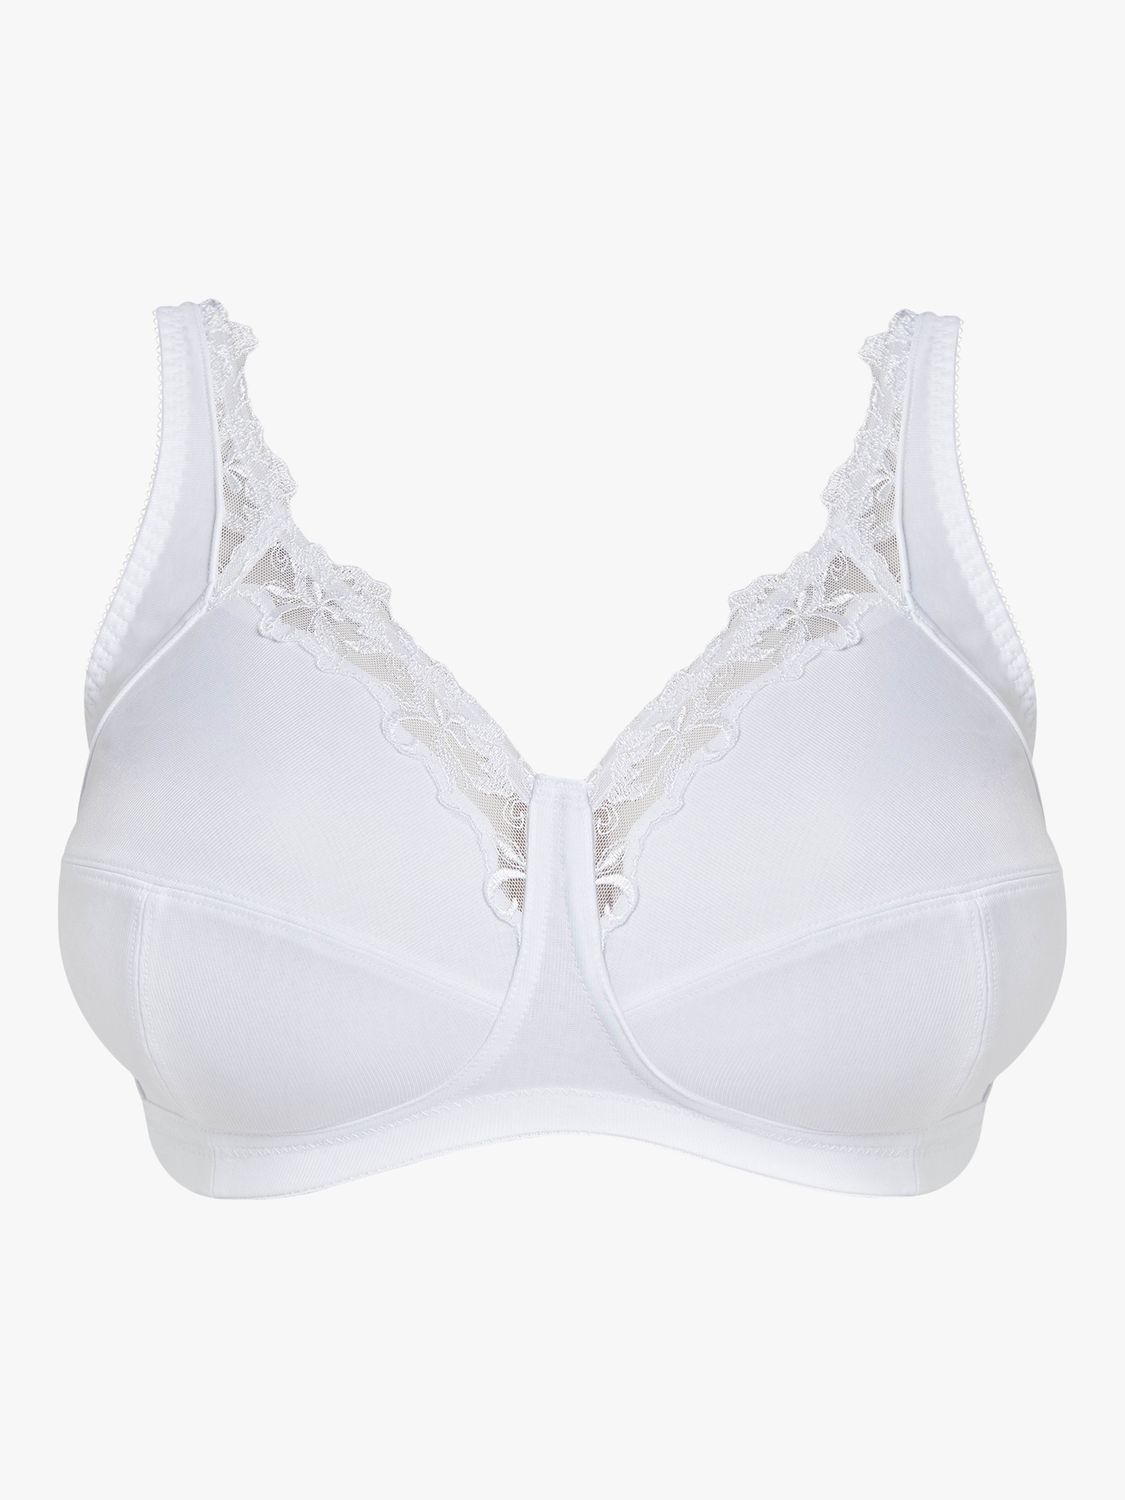 Royce Robyn Non-Wired Full Cup Bra, White at John Lewis & Partners